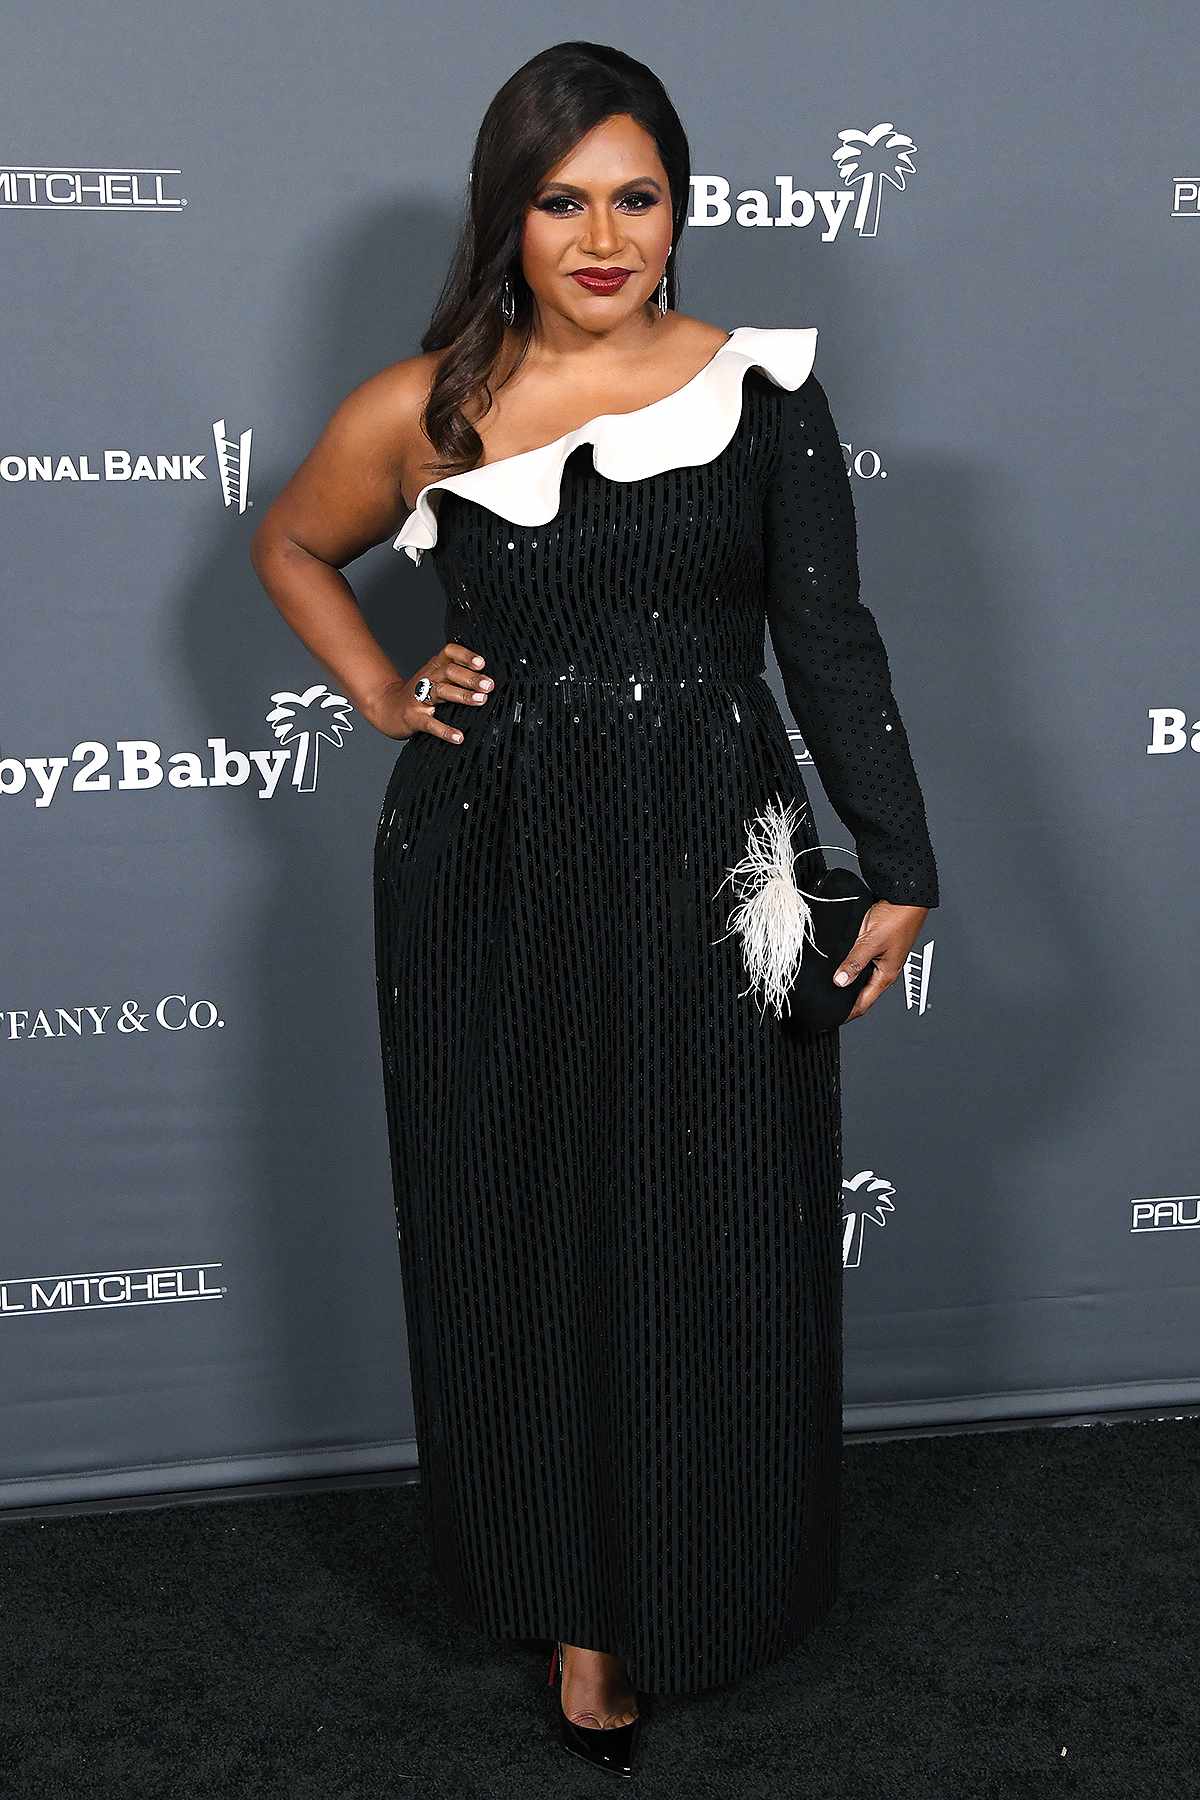 Baby2Baby 10-Year Gala Presented By Paul Mitchell - Arrivals